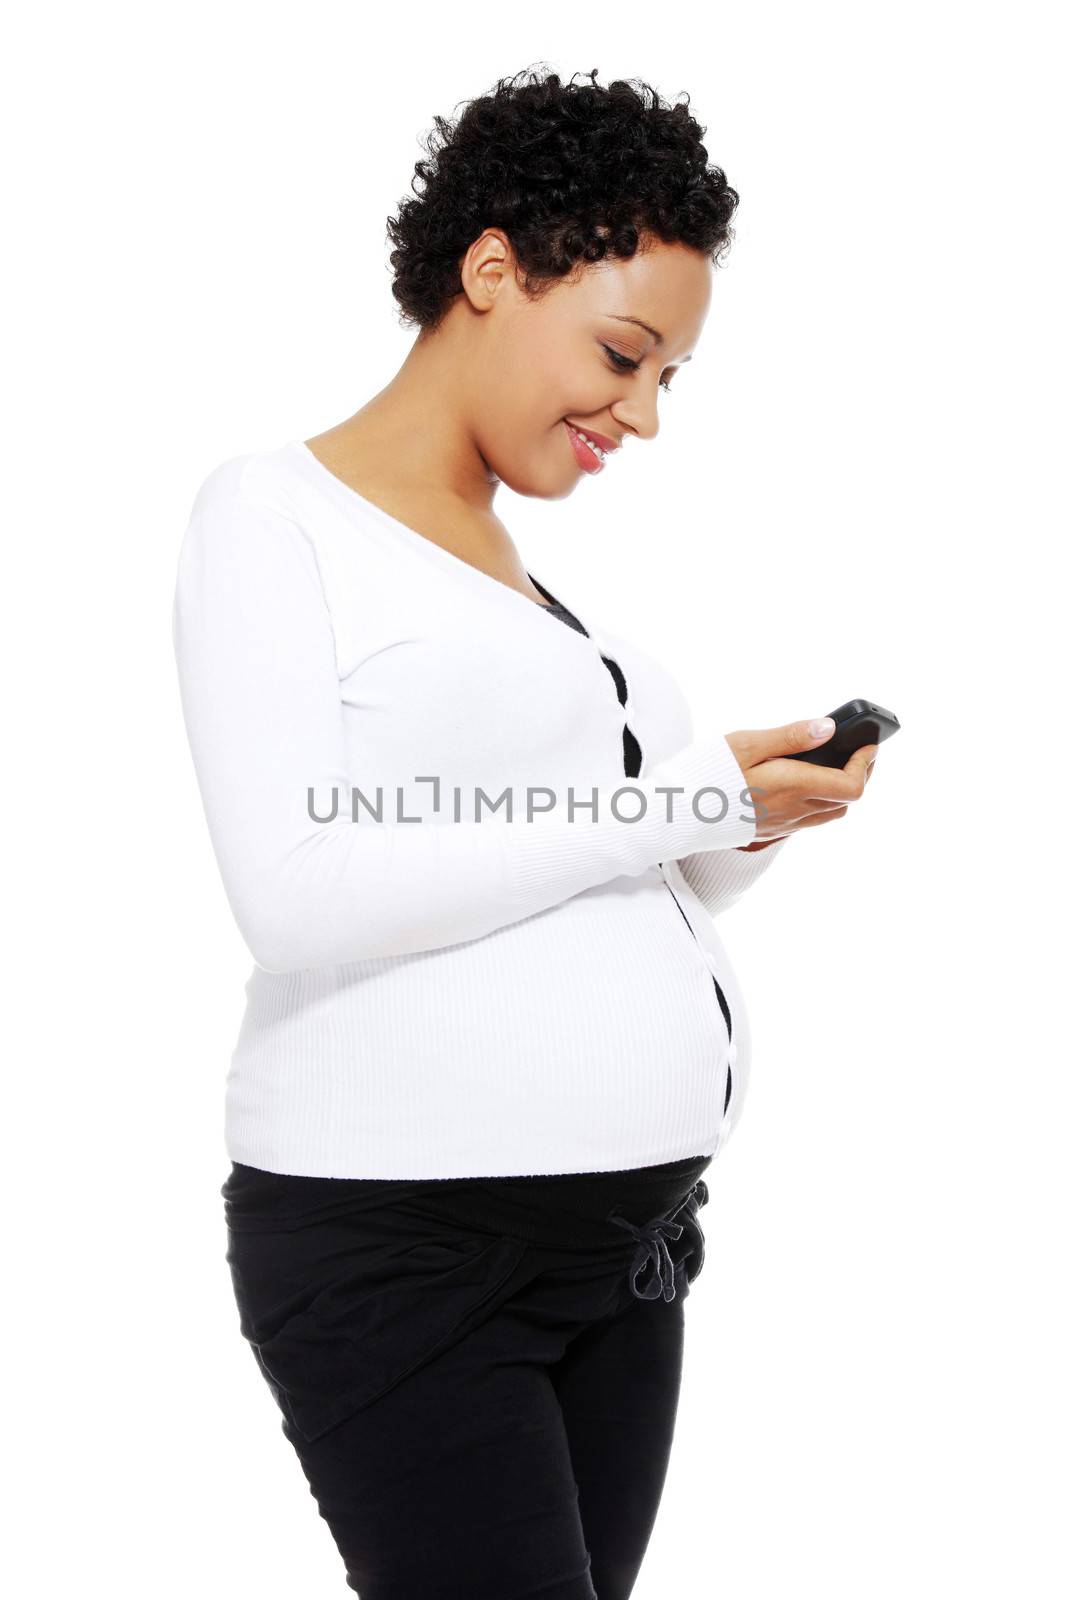 Beautiful pregnant woman dialing a number on her cellphone, isolated on a white background.